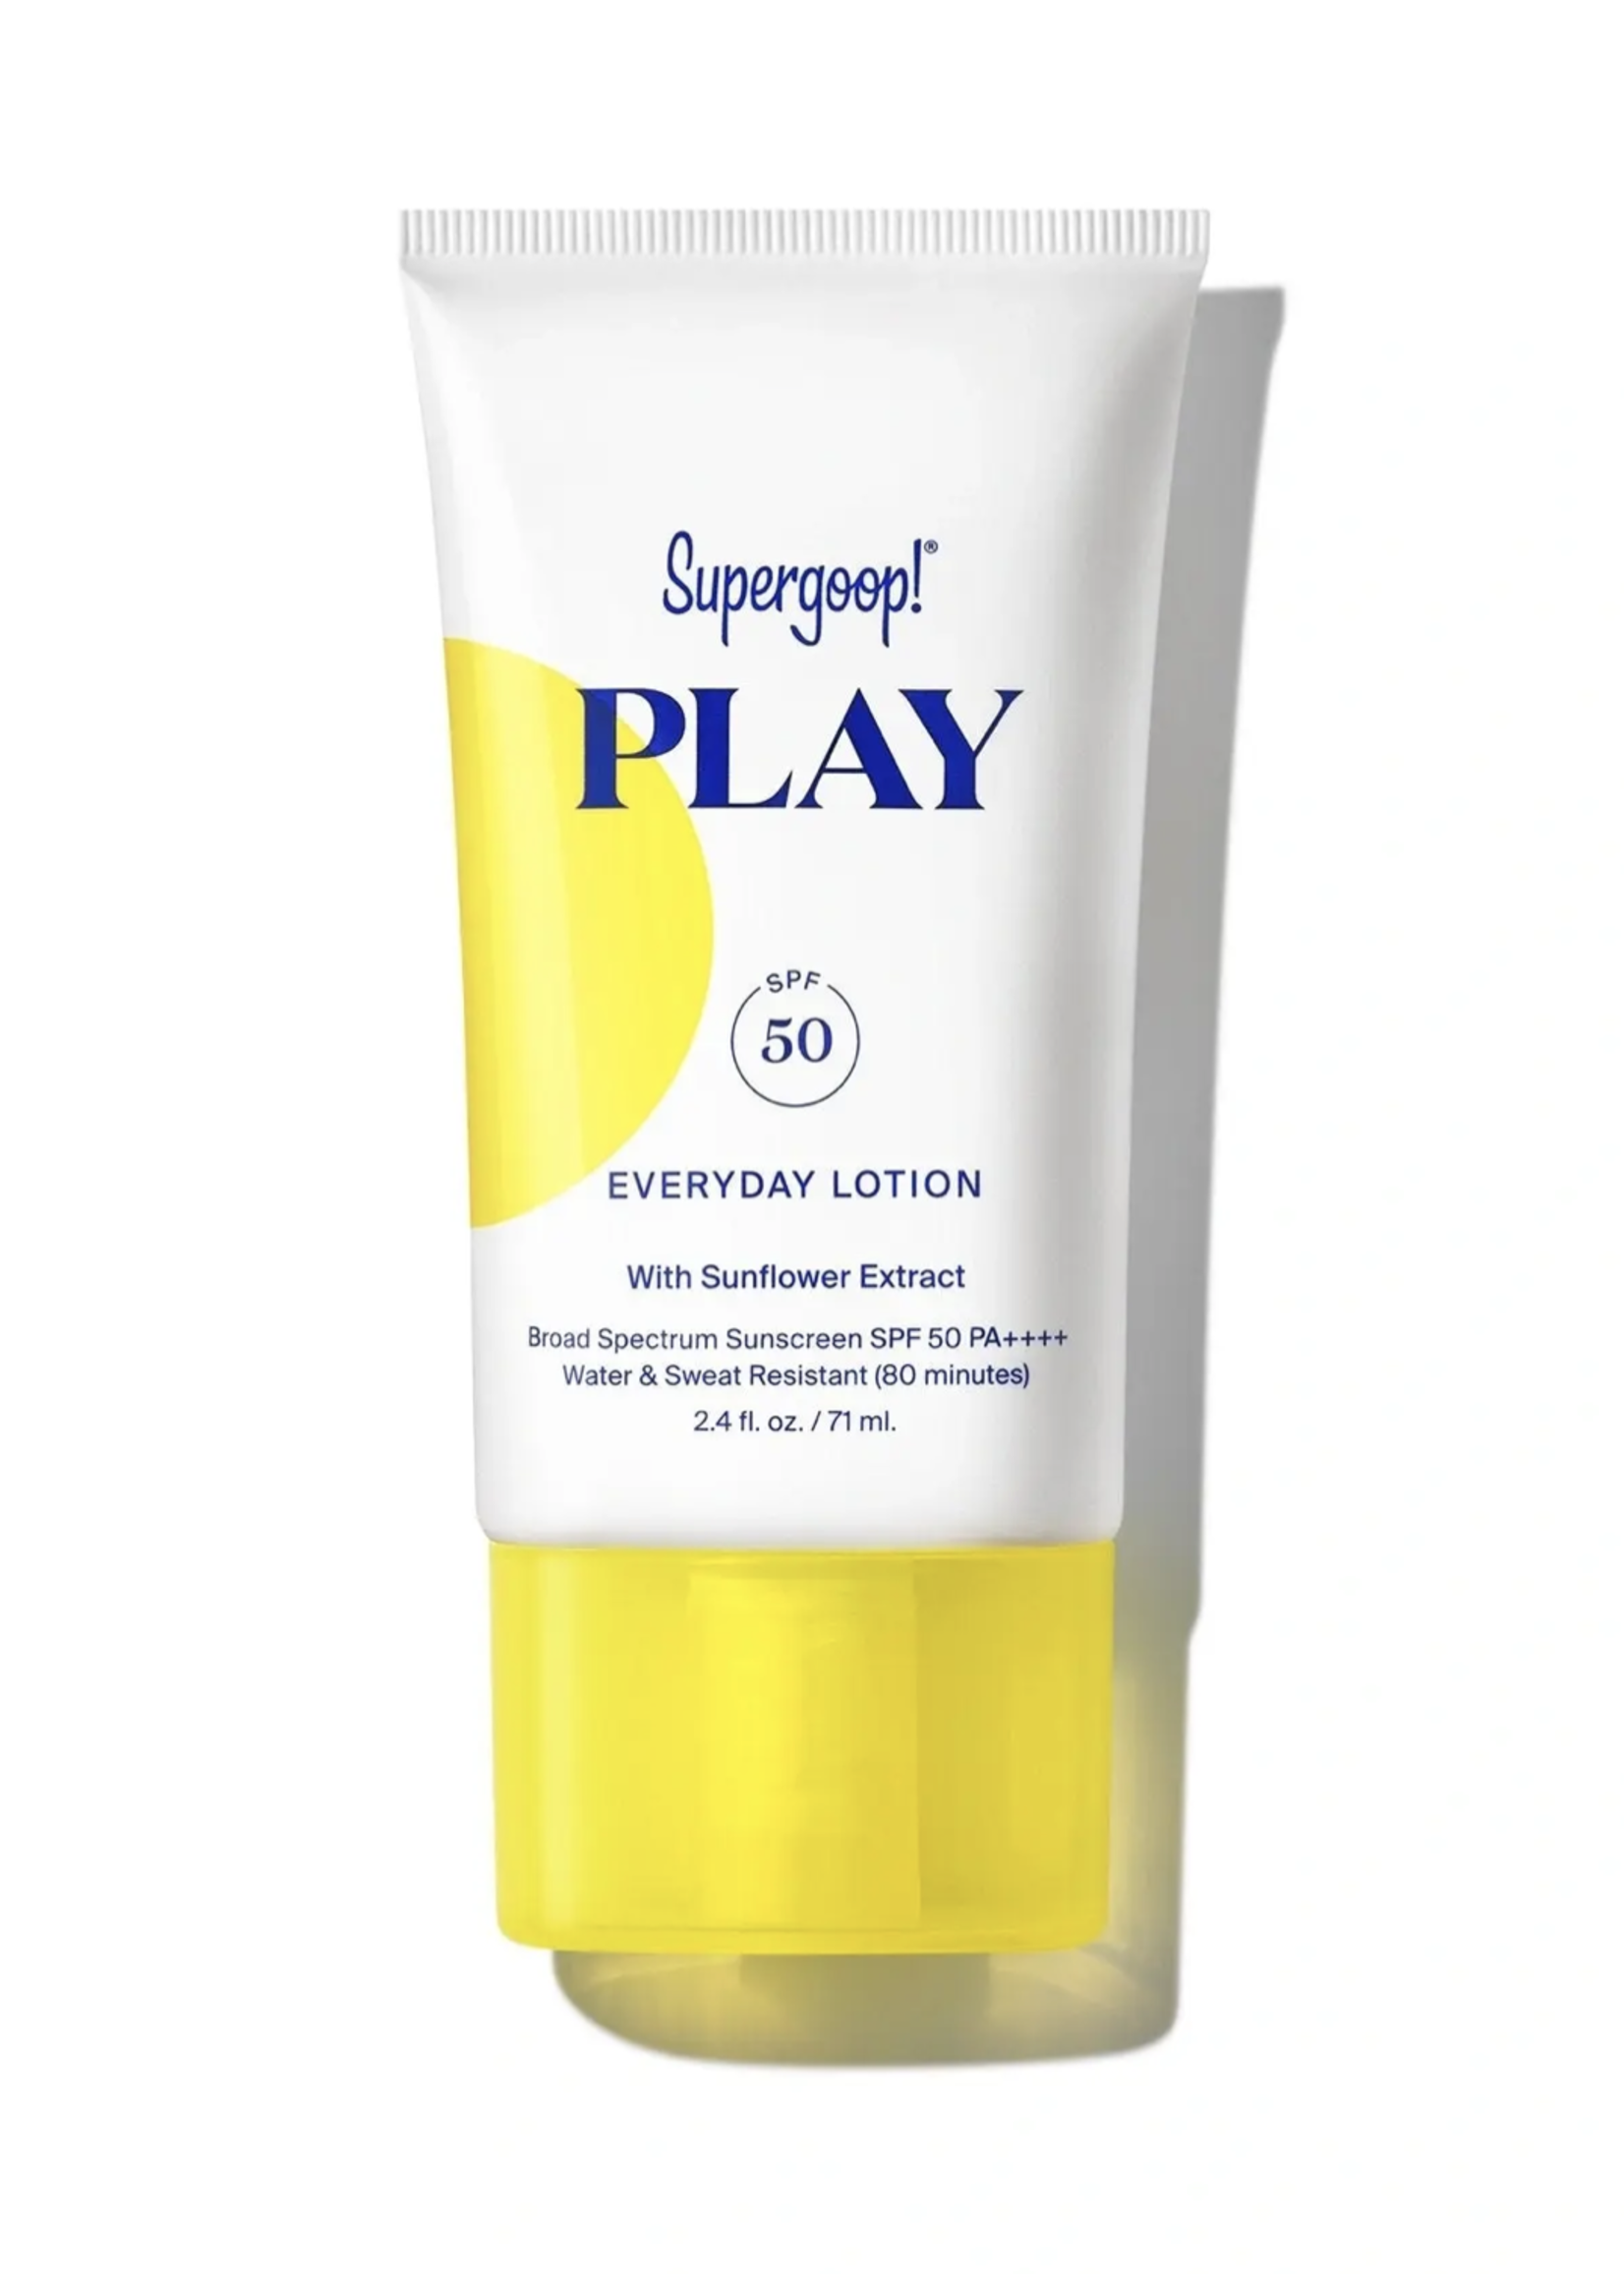 SUPERGOOP PLAY EVERYDAY LOTION SPF 50 WITH SUNFLOWER EXTRACT